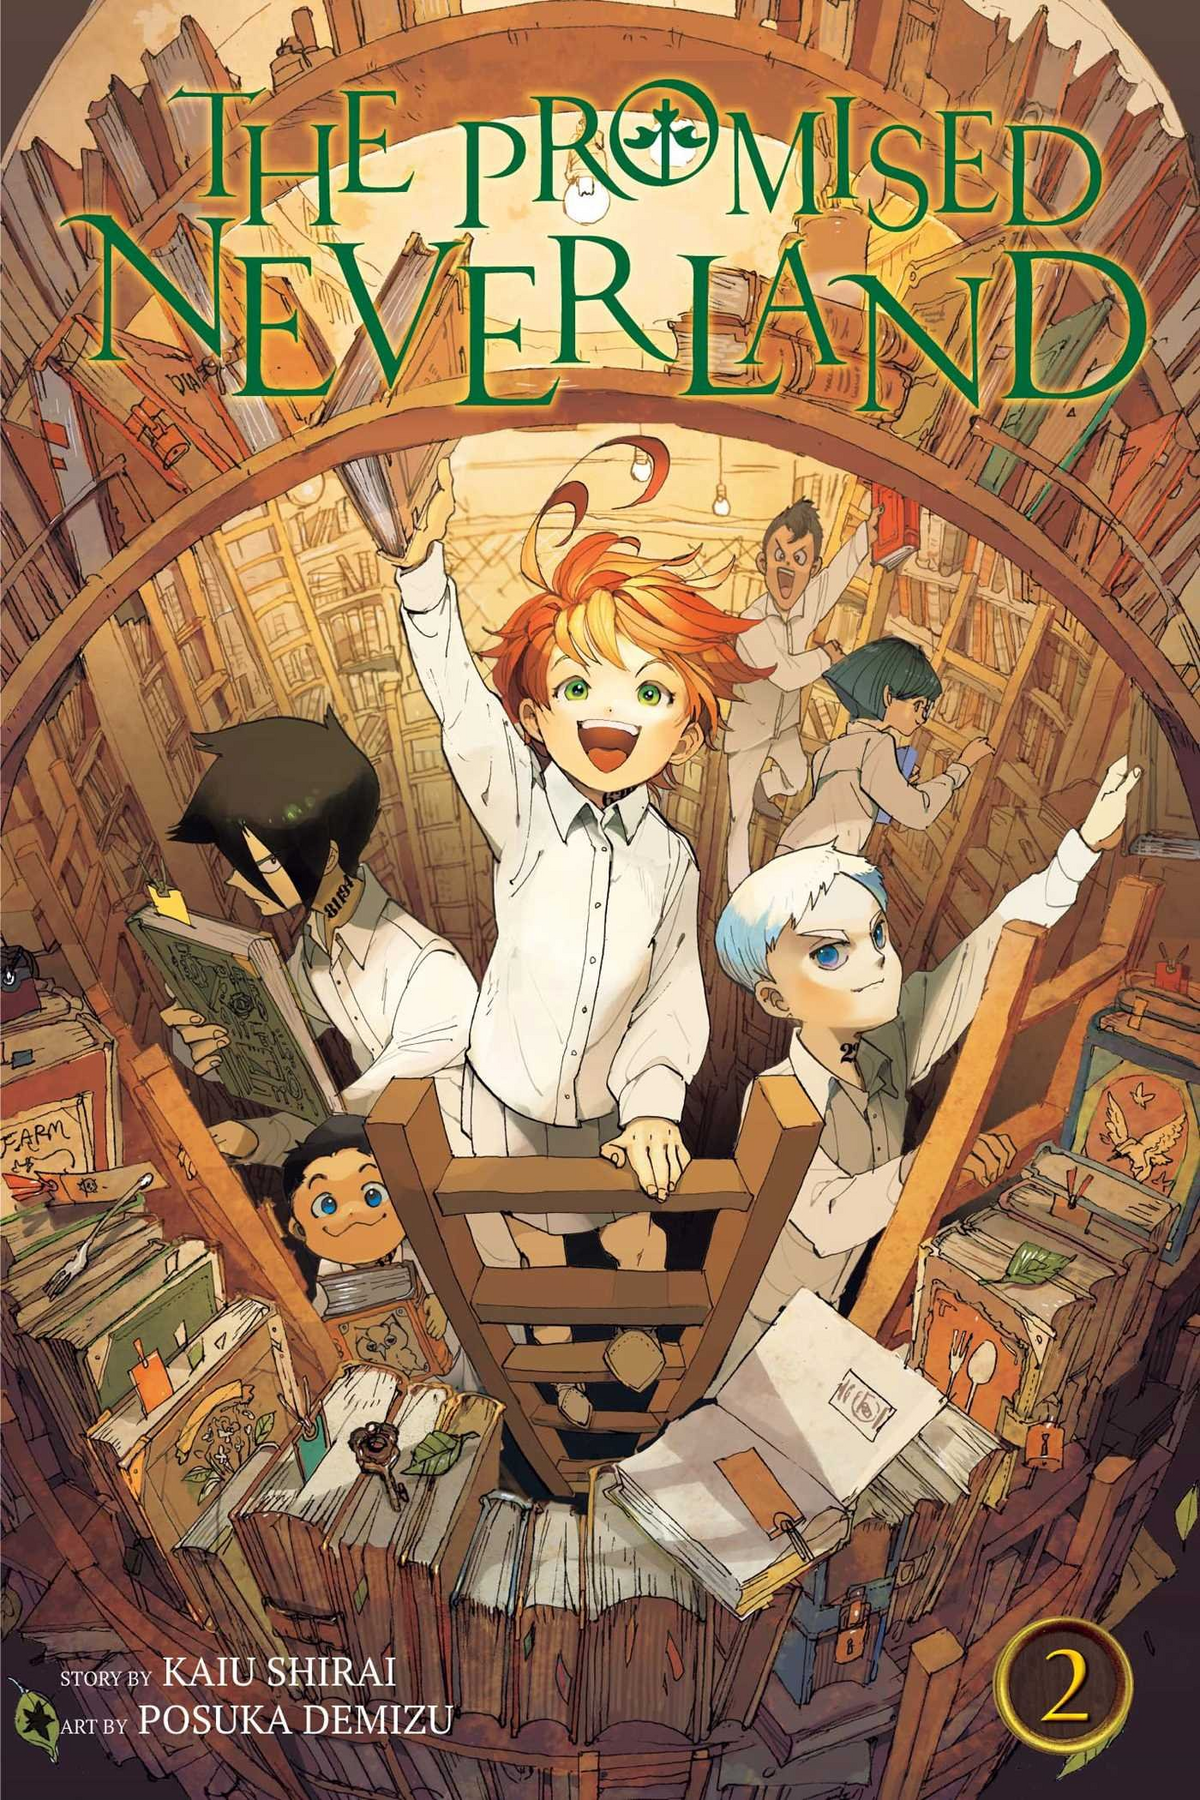 Download Featuring characters from The Promised Neverland anime